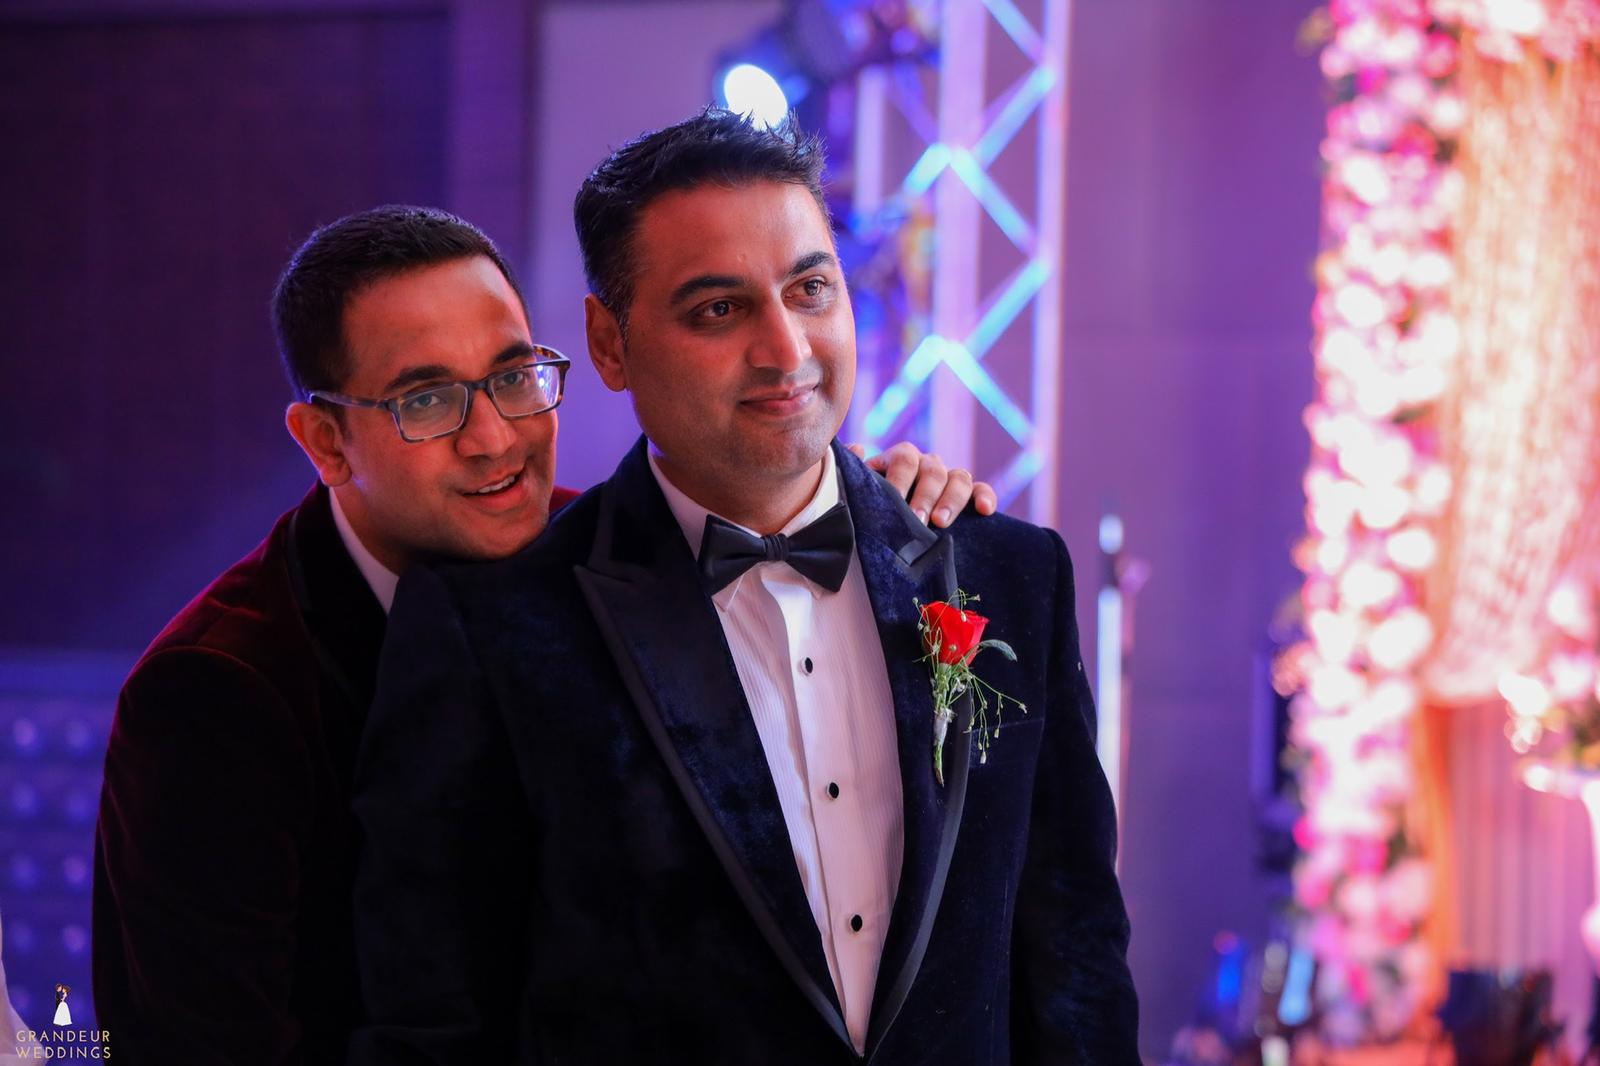 Vaibhav Jain (left) and Parag Mehta (right) petitioned the registration of their marriage under the Foreign Marriage Act